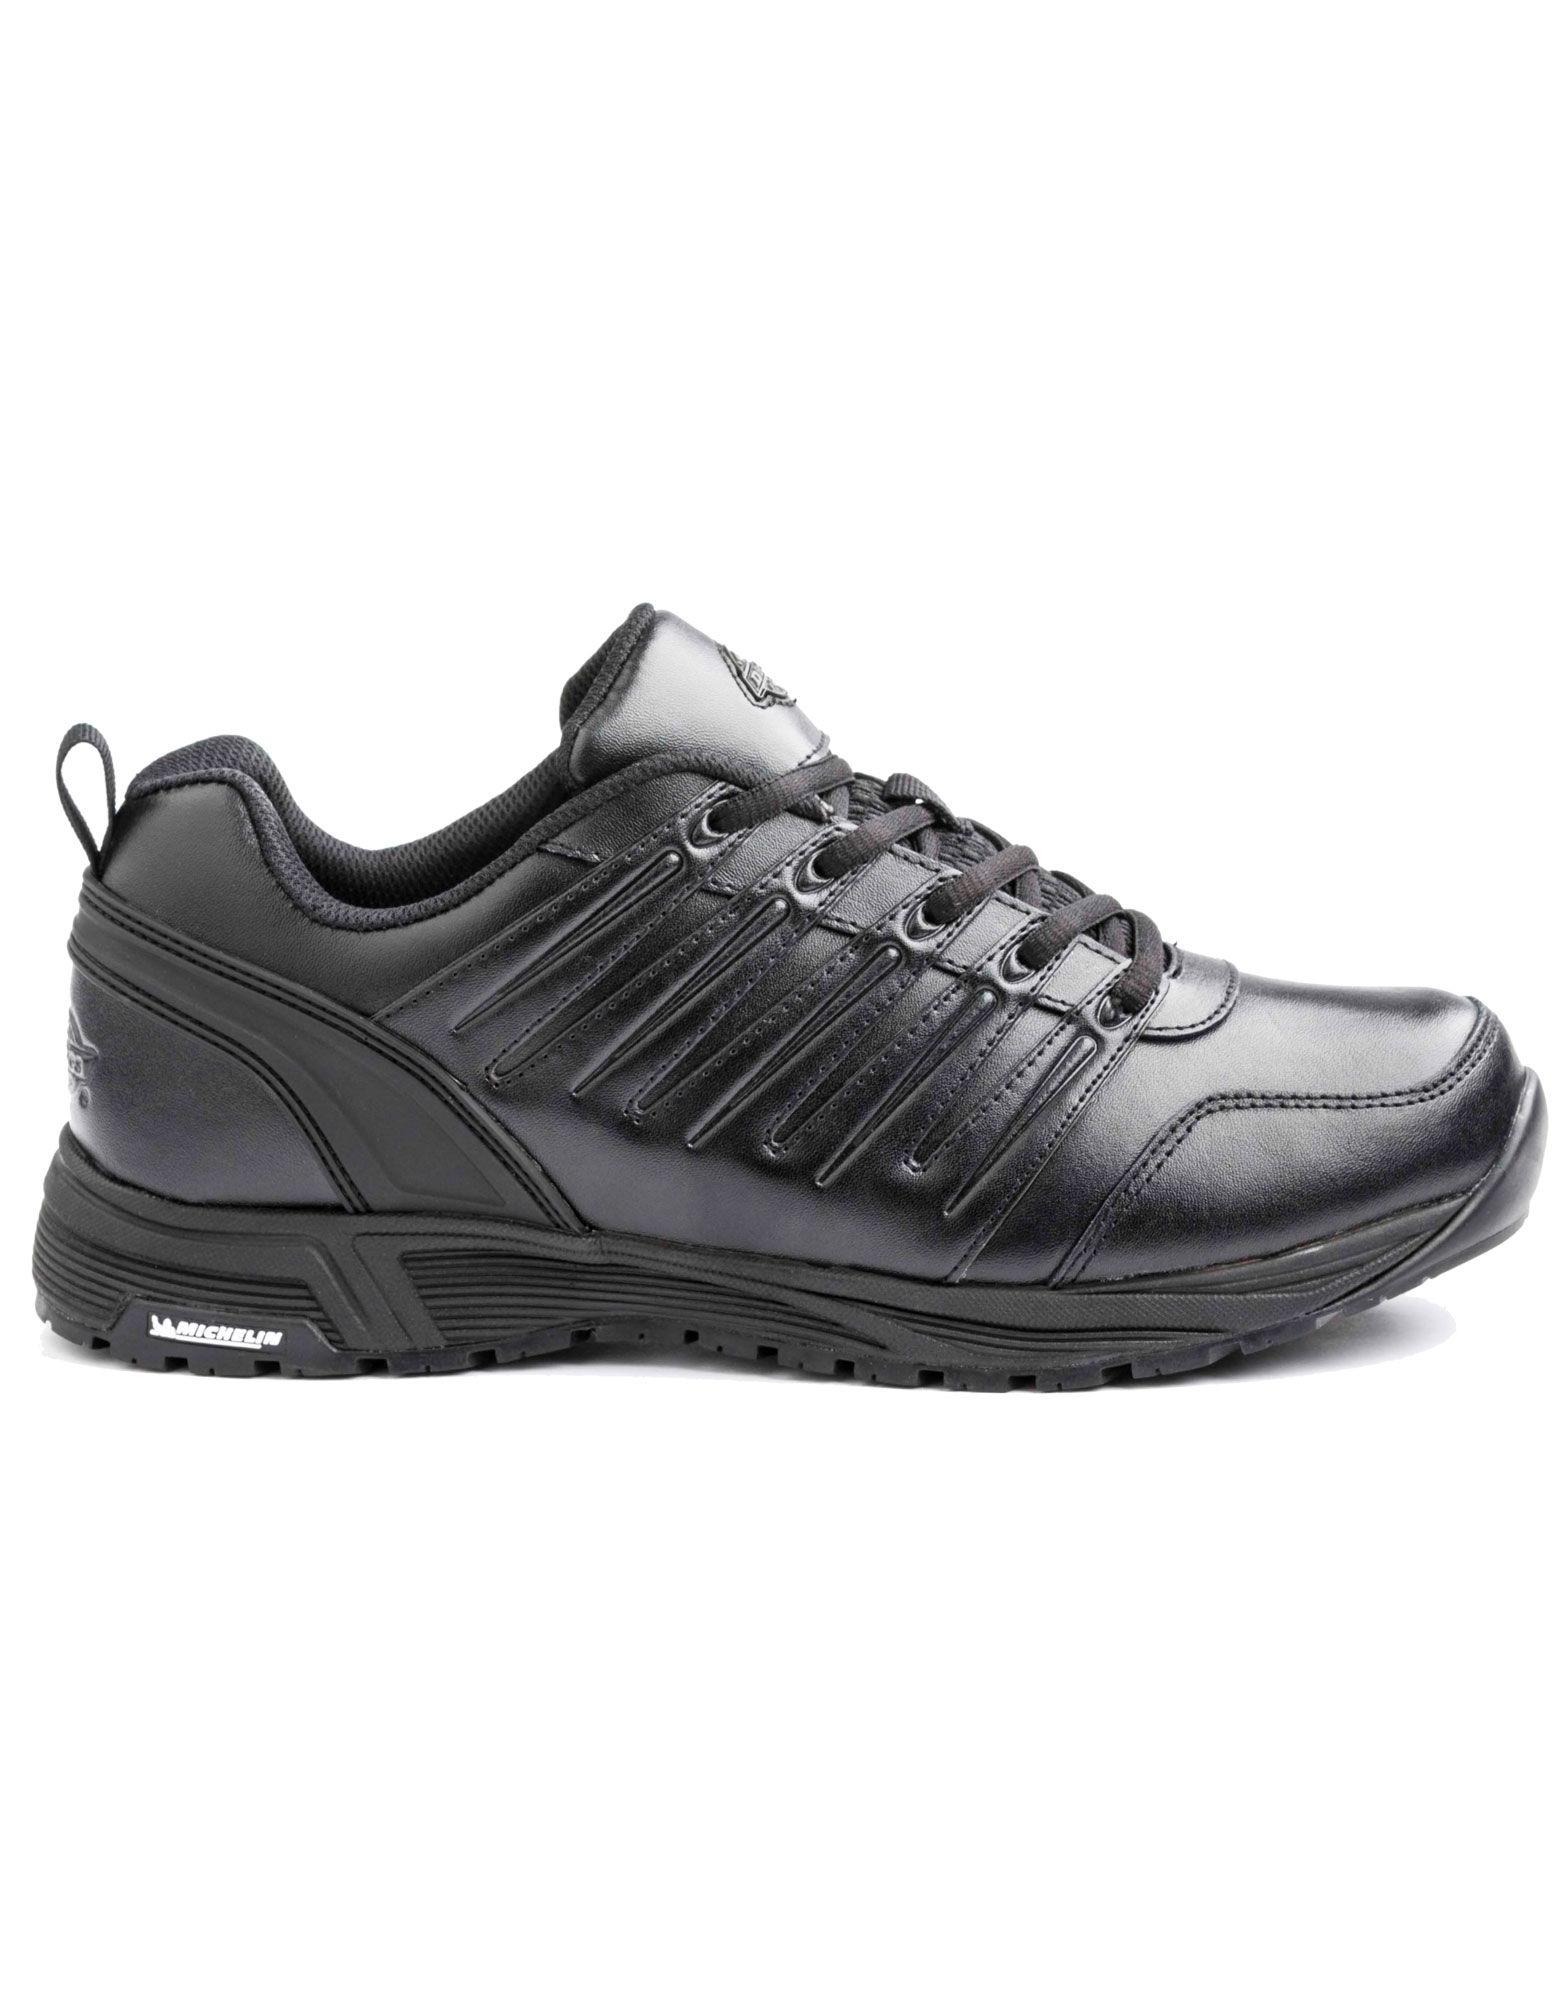 Apex Slip Resistant Shoe With Michelin 